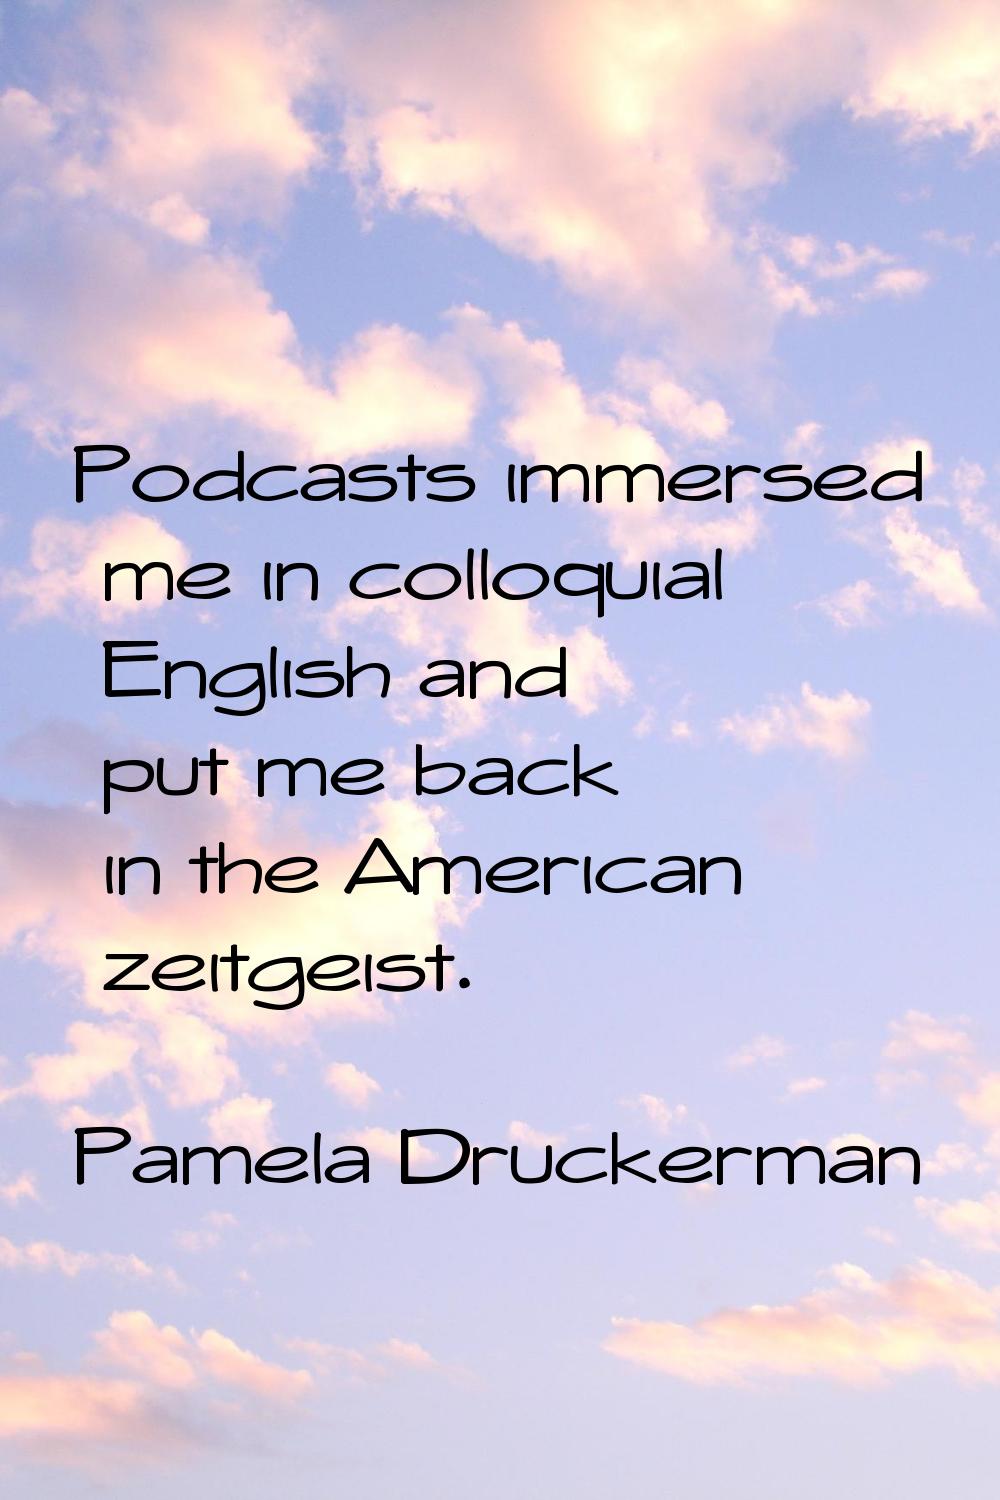 Podcasts immersed me in colloquial English and put me back in the American zeitgeist.